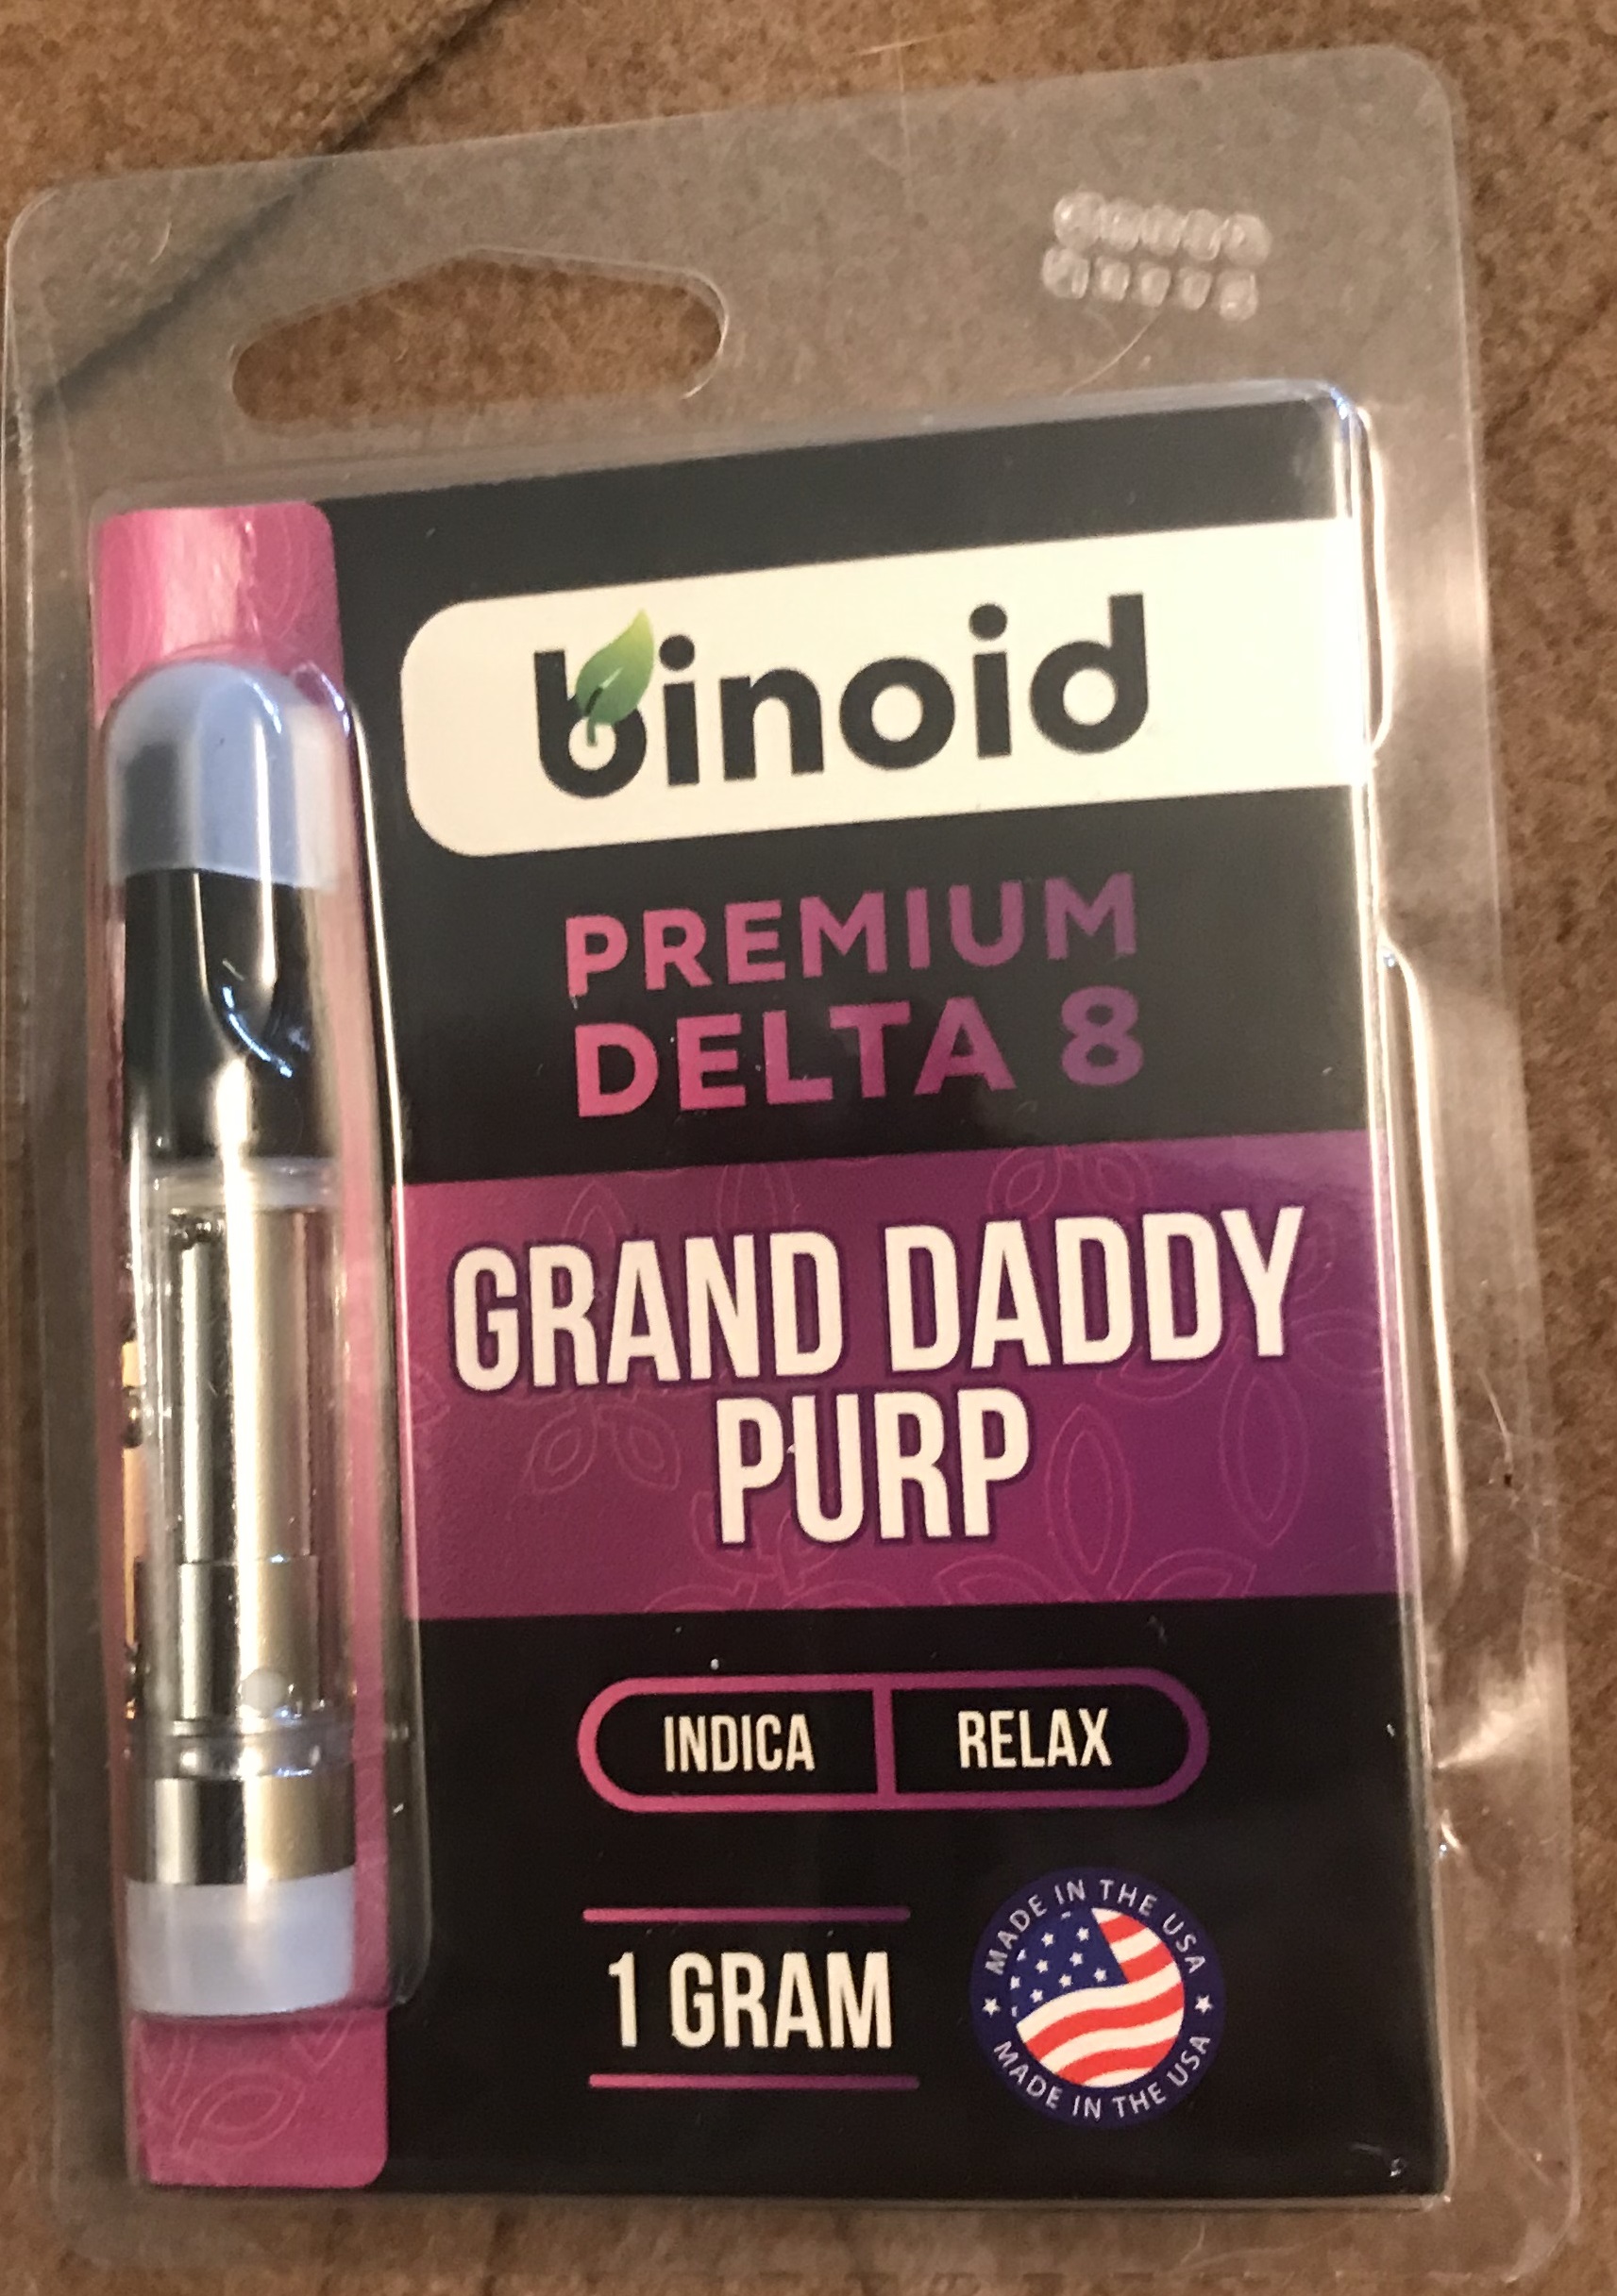 How Long For Delta 8 Gummy To Kick In - Products|Thc|Hemp|Brand|Gummies|Product|Delta-8|Cbd|Origin|Cannabis|Delta|Users|Effects|Cartridges|Brands|Range|List|Research|Usasource|Options|Benefits|Plant|Companies|Vape|Source|Results|Gummy|People|Space|High-Quality|Quality|Place|Overview|Flowers|Lab|Drug|Cannabinoids|Tinctures|Overviewproducts|Cartridge|Delta-8 Thc|Delta-8 Products|Delta-9 Thc|Delta-8 Brands|Usa Source|Delta-8 Thc Products|Cannabis Plant|Federal Level|United States|Delta-8 Gummies|Delta-8 Space|Health Canada|Delta Products|Delta-8 Thc Gummies|Delta-8 Companies|Vape Cartridges|Similar Benefits|Hemp Doctor|Brand Overviewproducts|Drug Test|High-Quality Products|Organic Hemp|San Jose|Editorial Team|Farm Bill|Overview Products|Wide Range|Psychoactive Properties|Reliable Provider|Boston Hempire